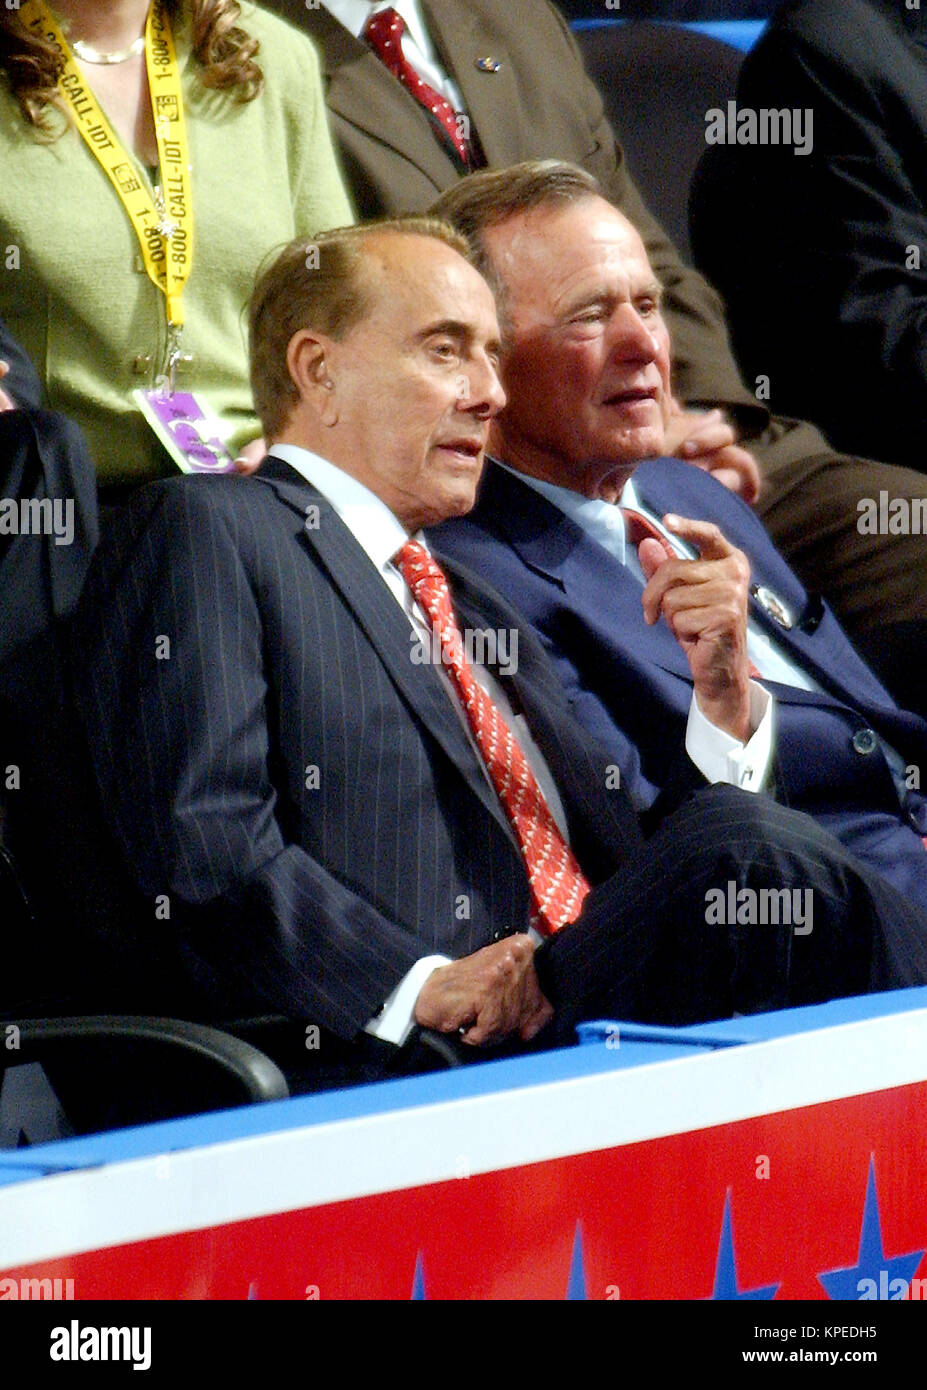 New York, NY - August 31, 2004 --  Former United States Senator Bob Dole (Republican of Kansas) and former United States President George H.W. Bush listen to the remarks of United States Senator Elizabeth Dole (Republican of North Carolina) at the 2004 Republican Convention in Madison Square Garden in New York on Monday, August 30, 2004..Credit: Ron Sachs / CNP.(RESTRICTION: No New York Metro or other Newspapers within a 75 mile radius of New York City) /MediaPunch Stock Photo